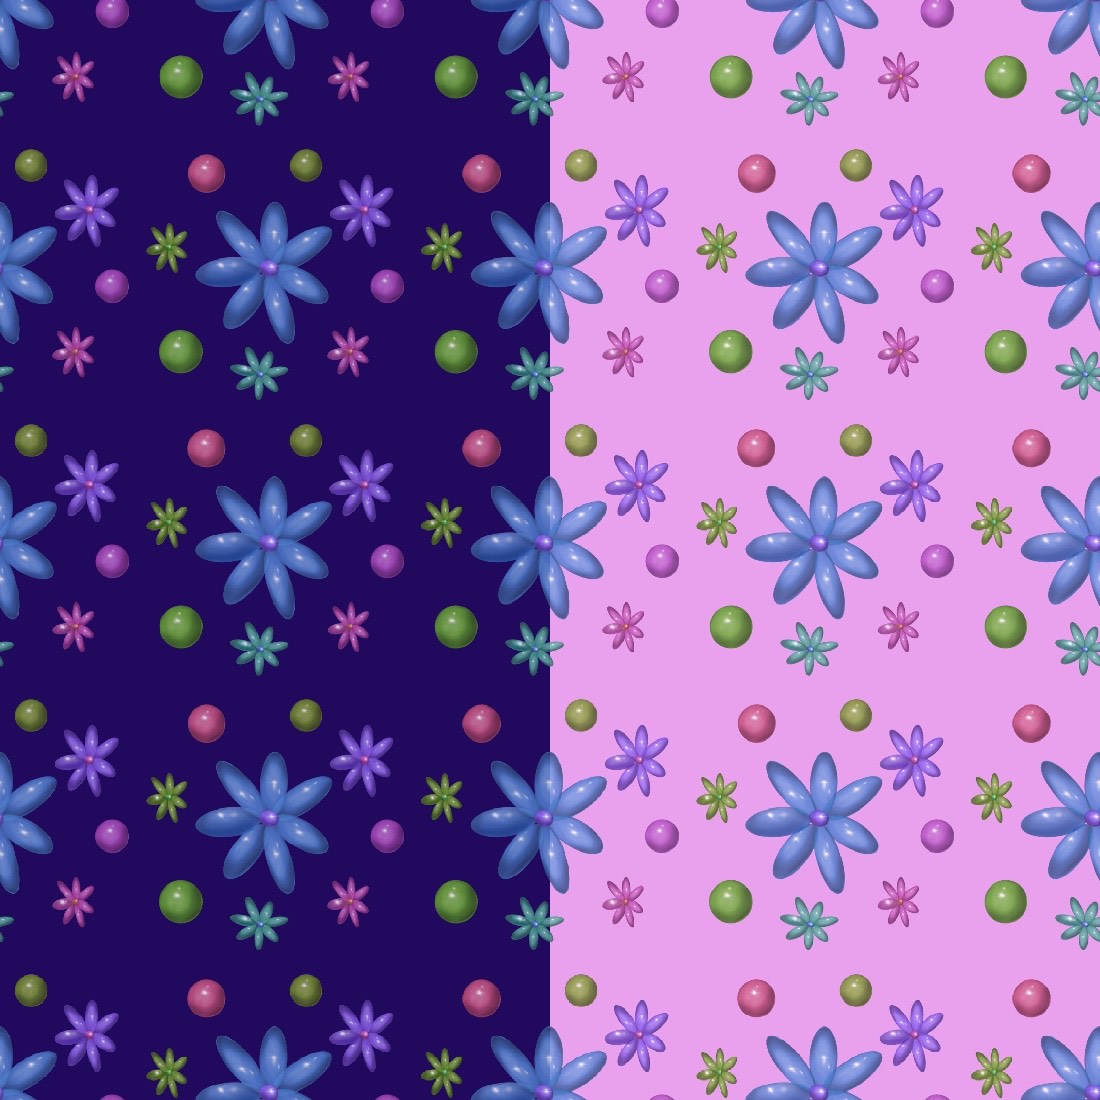 Balloon pattern cover image.